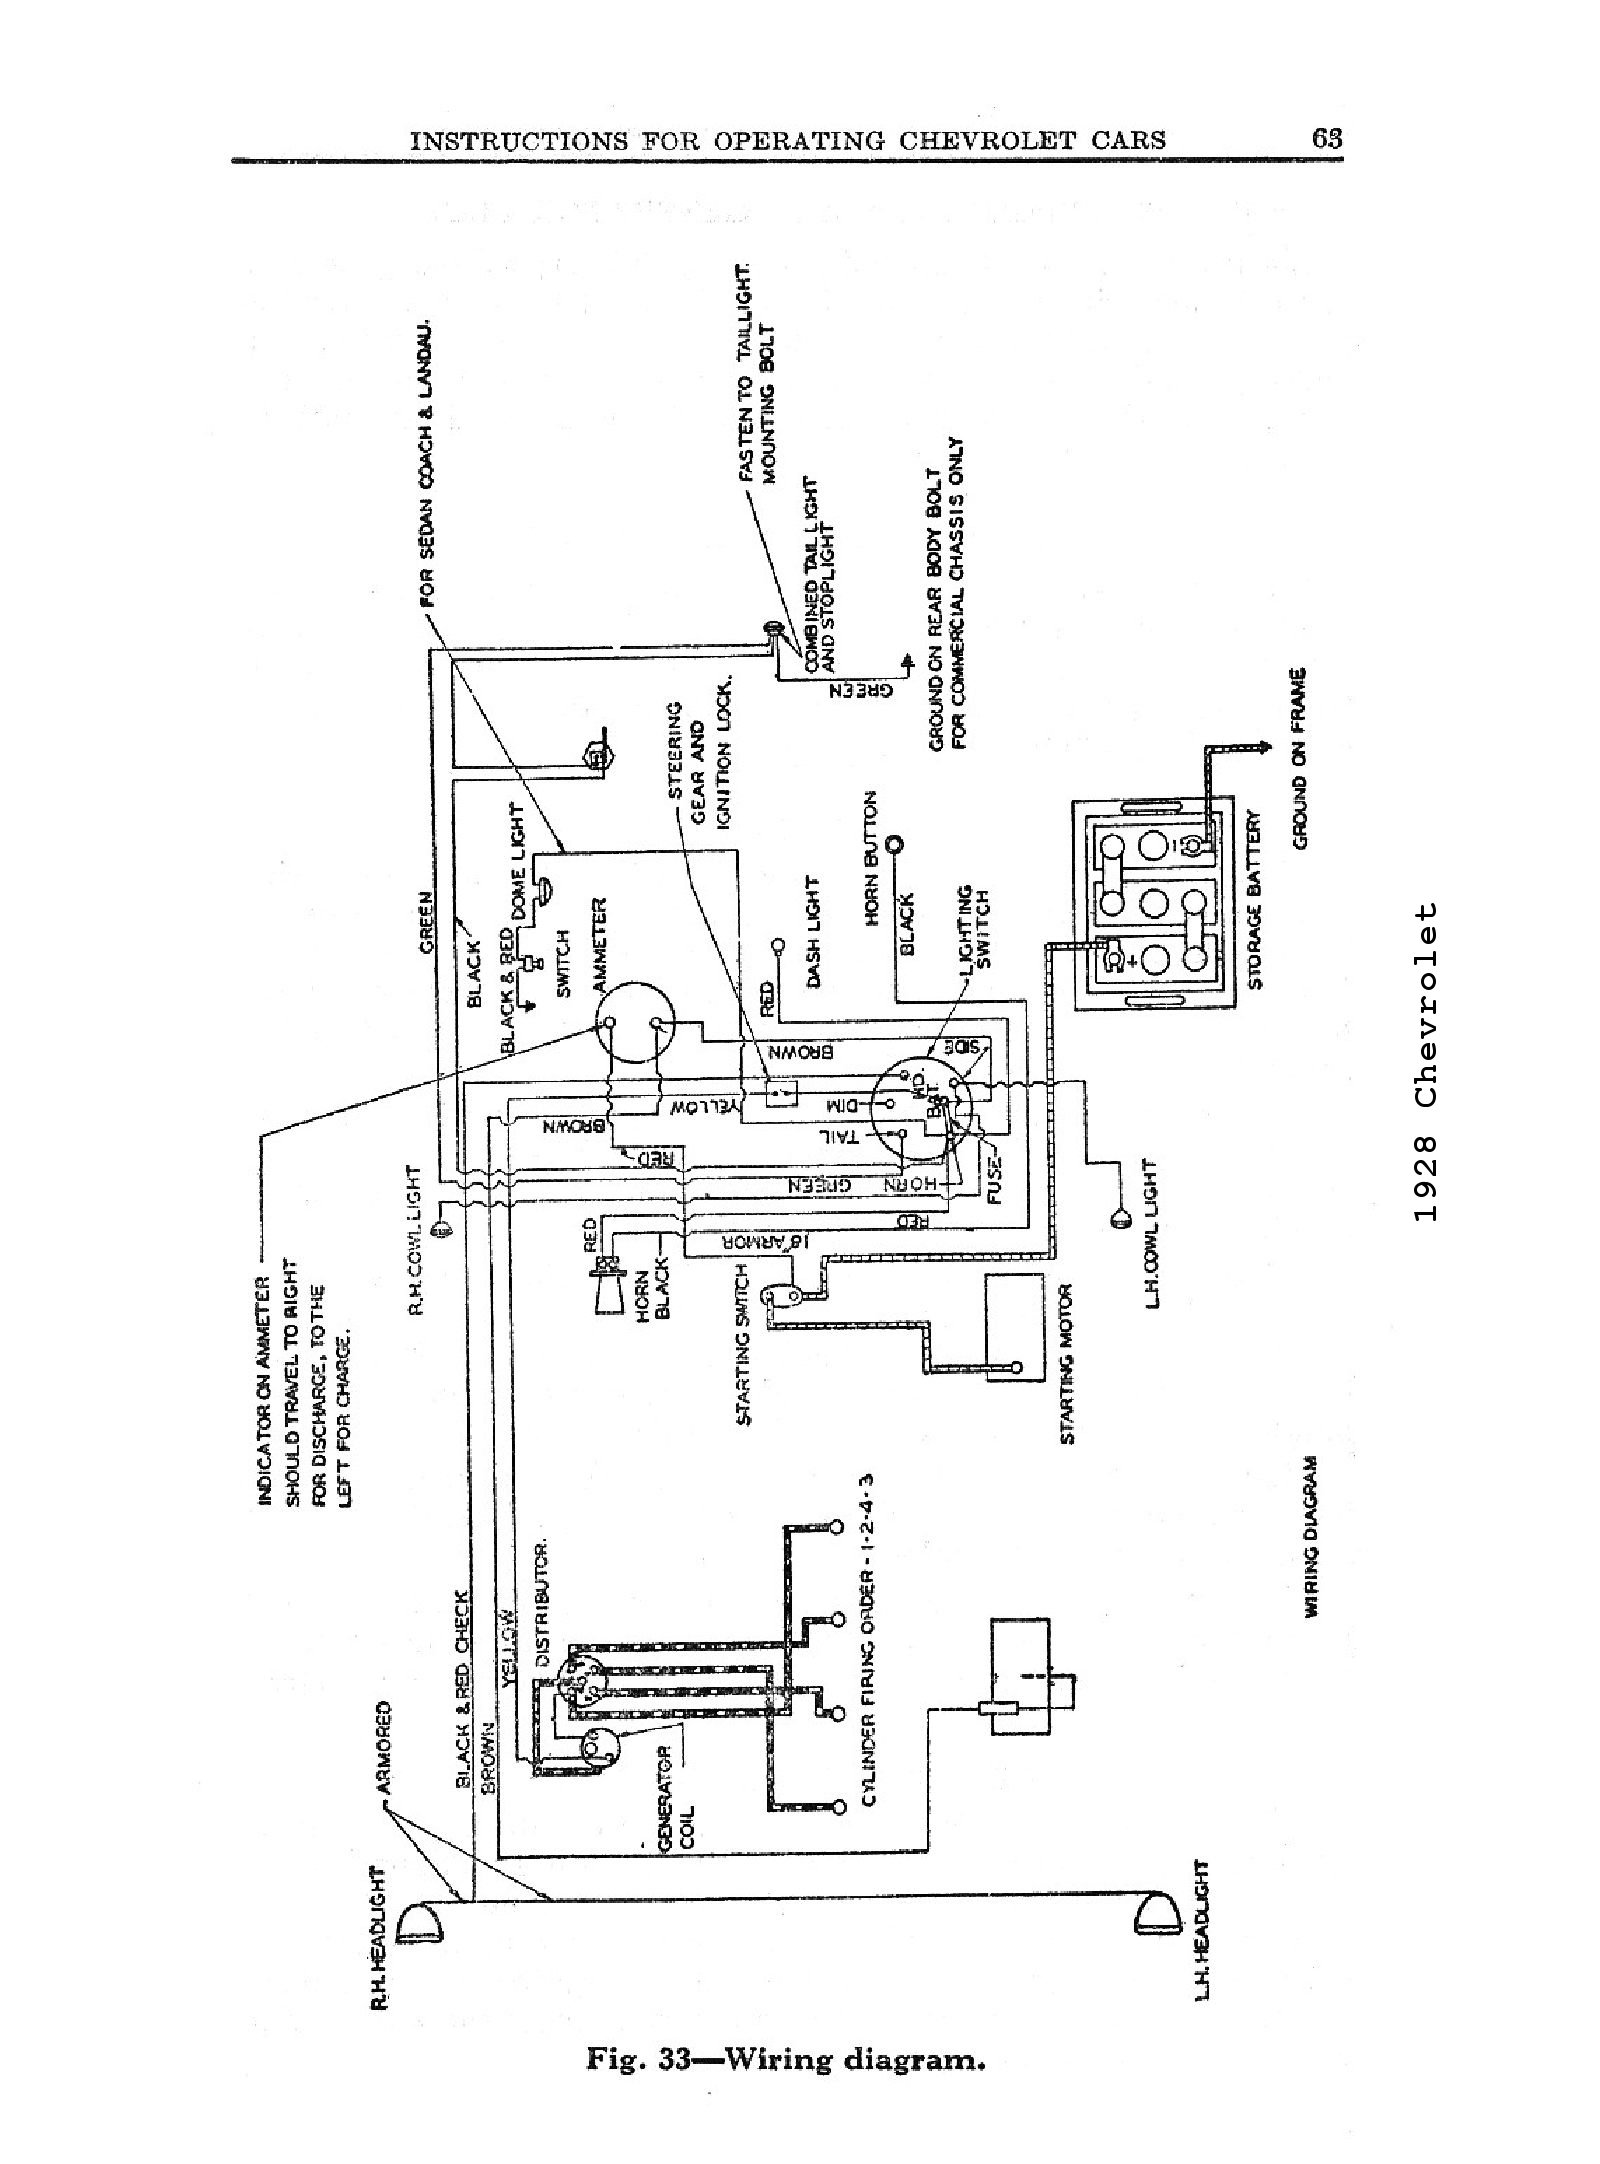 1956 Chevy Steering Column Wiring Diagram Free Picture